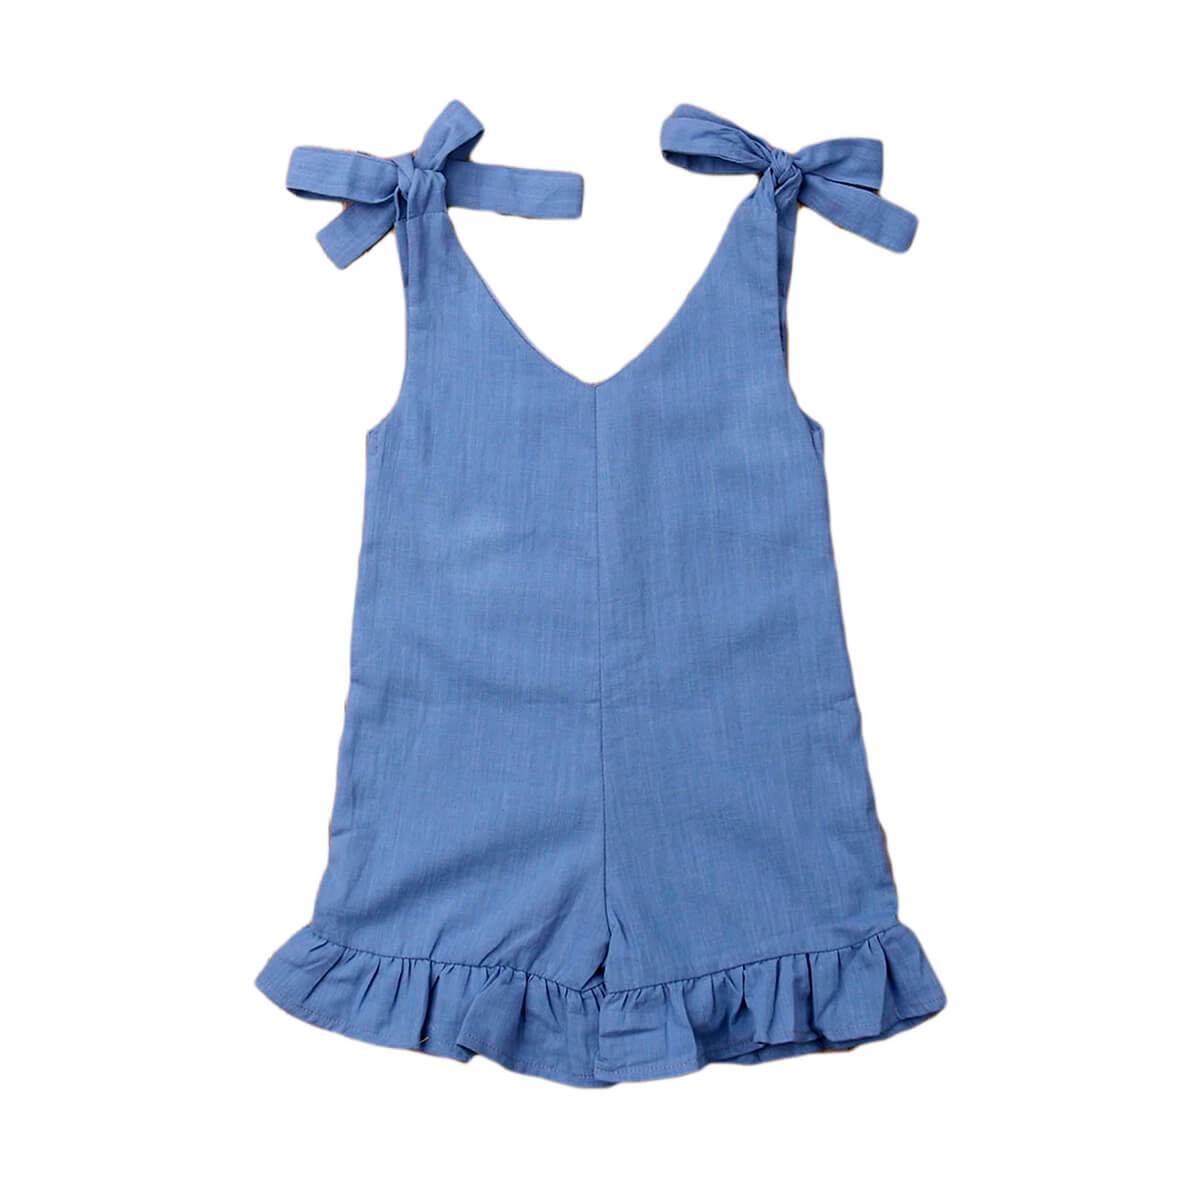 Solid Boho Romper - The Trendy Toddlers